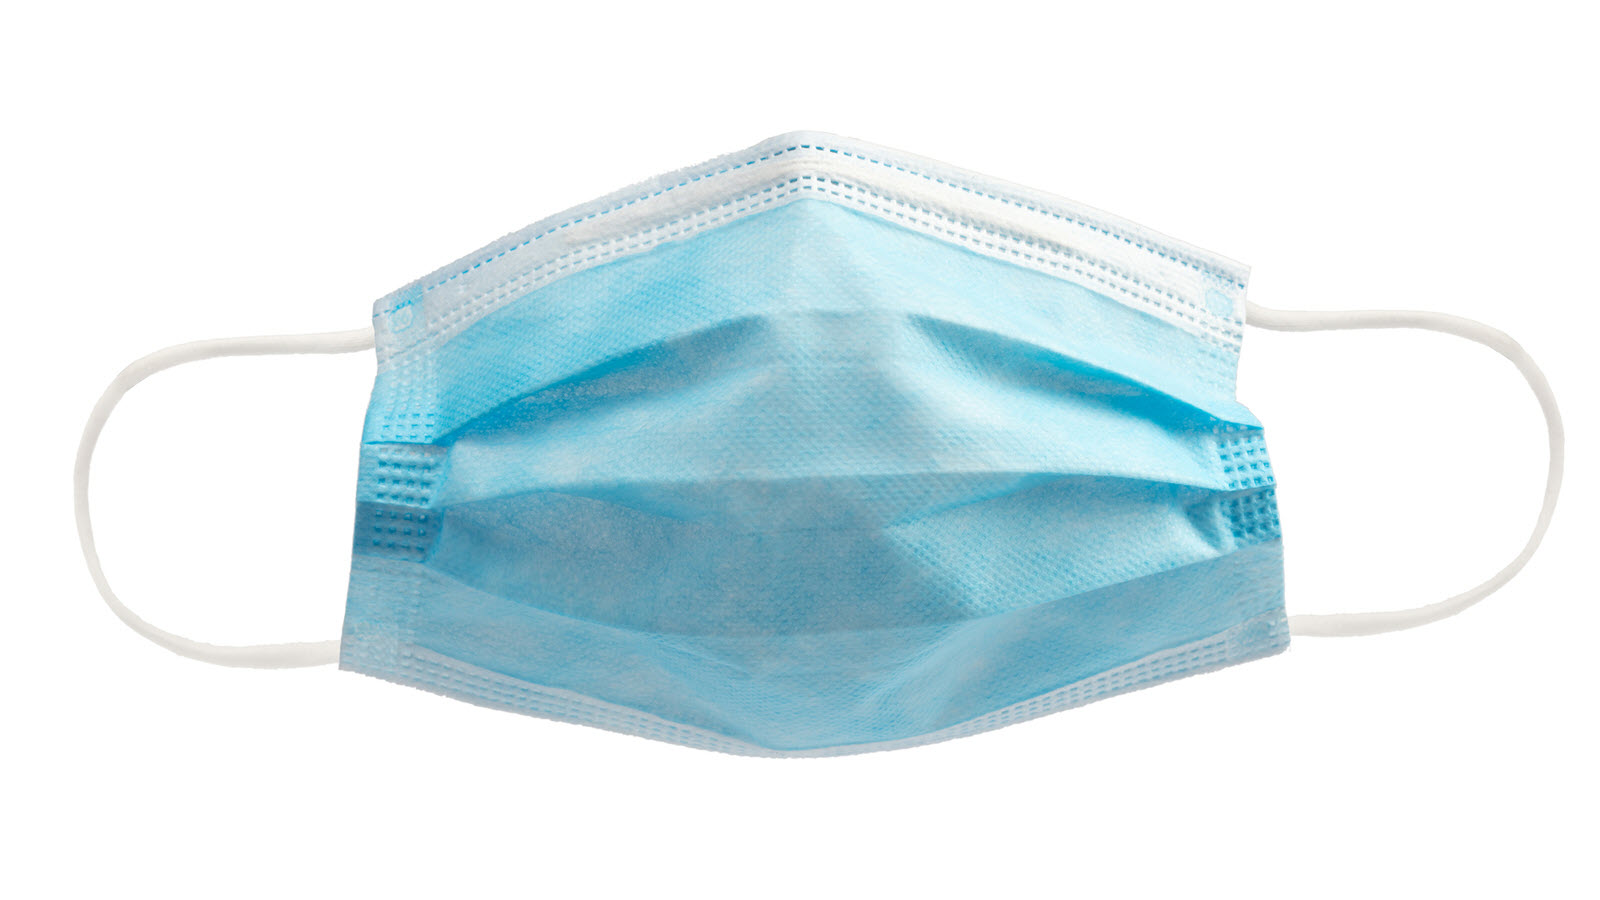 https://www.thermalpapernow.com/wp-content/uploads/2020/05/surgical-mask.jpg